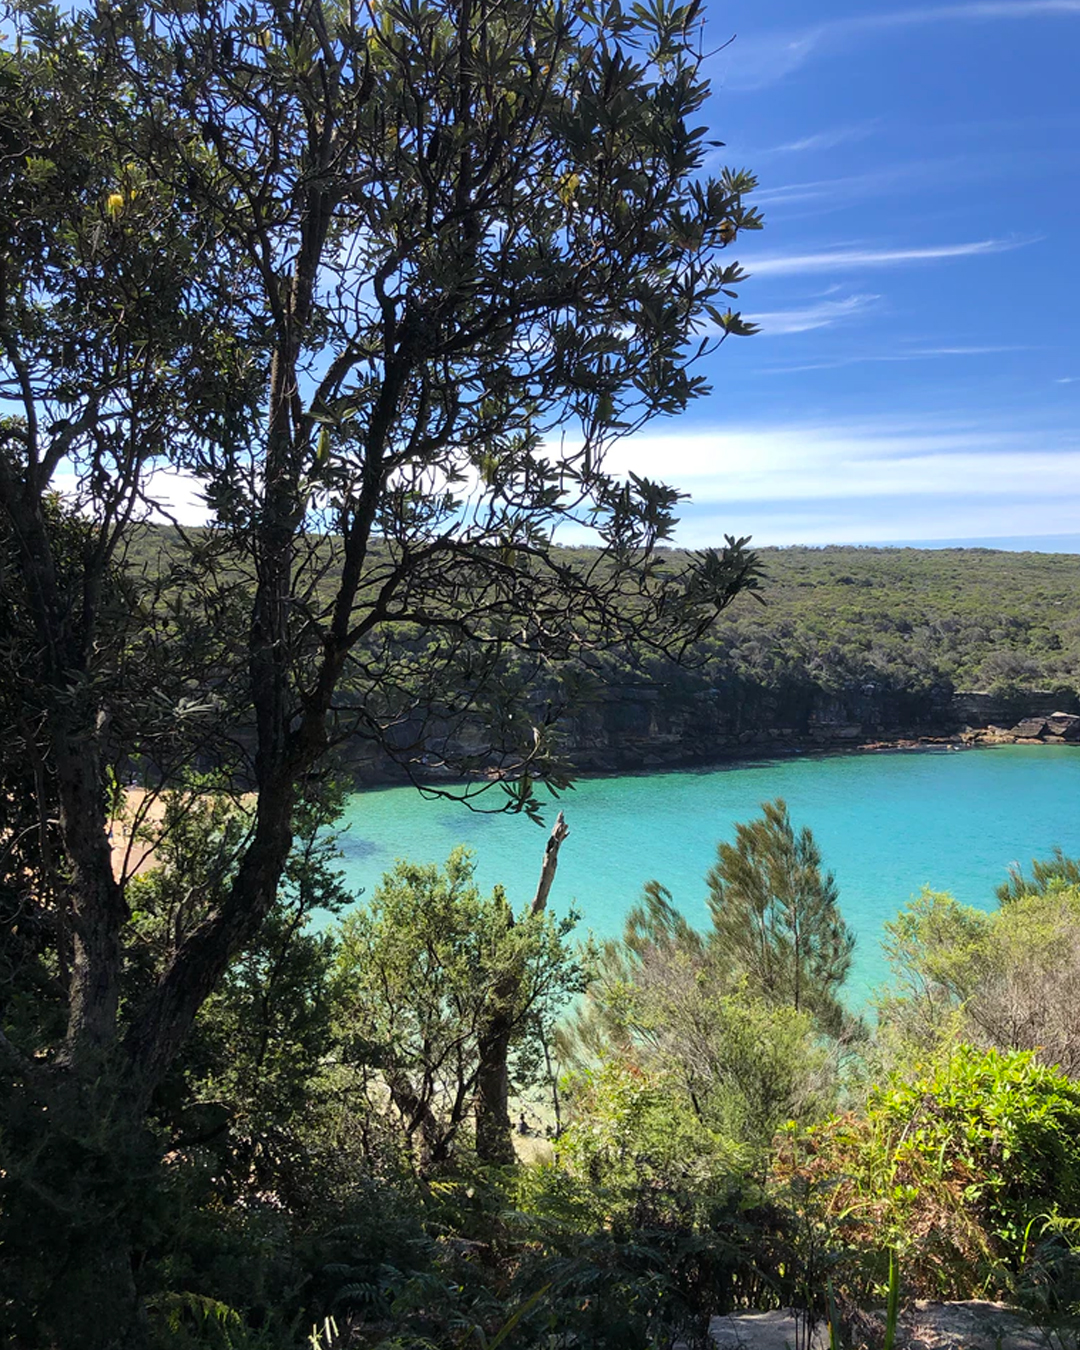 View from royal national park near Sydney of below beach with bright blue water